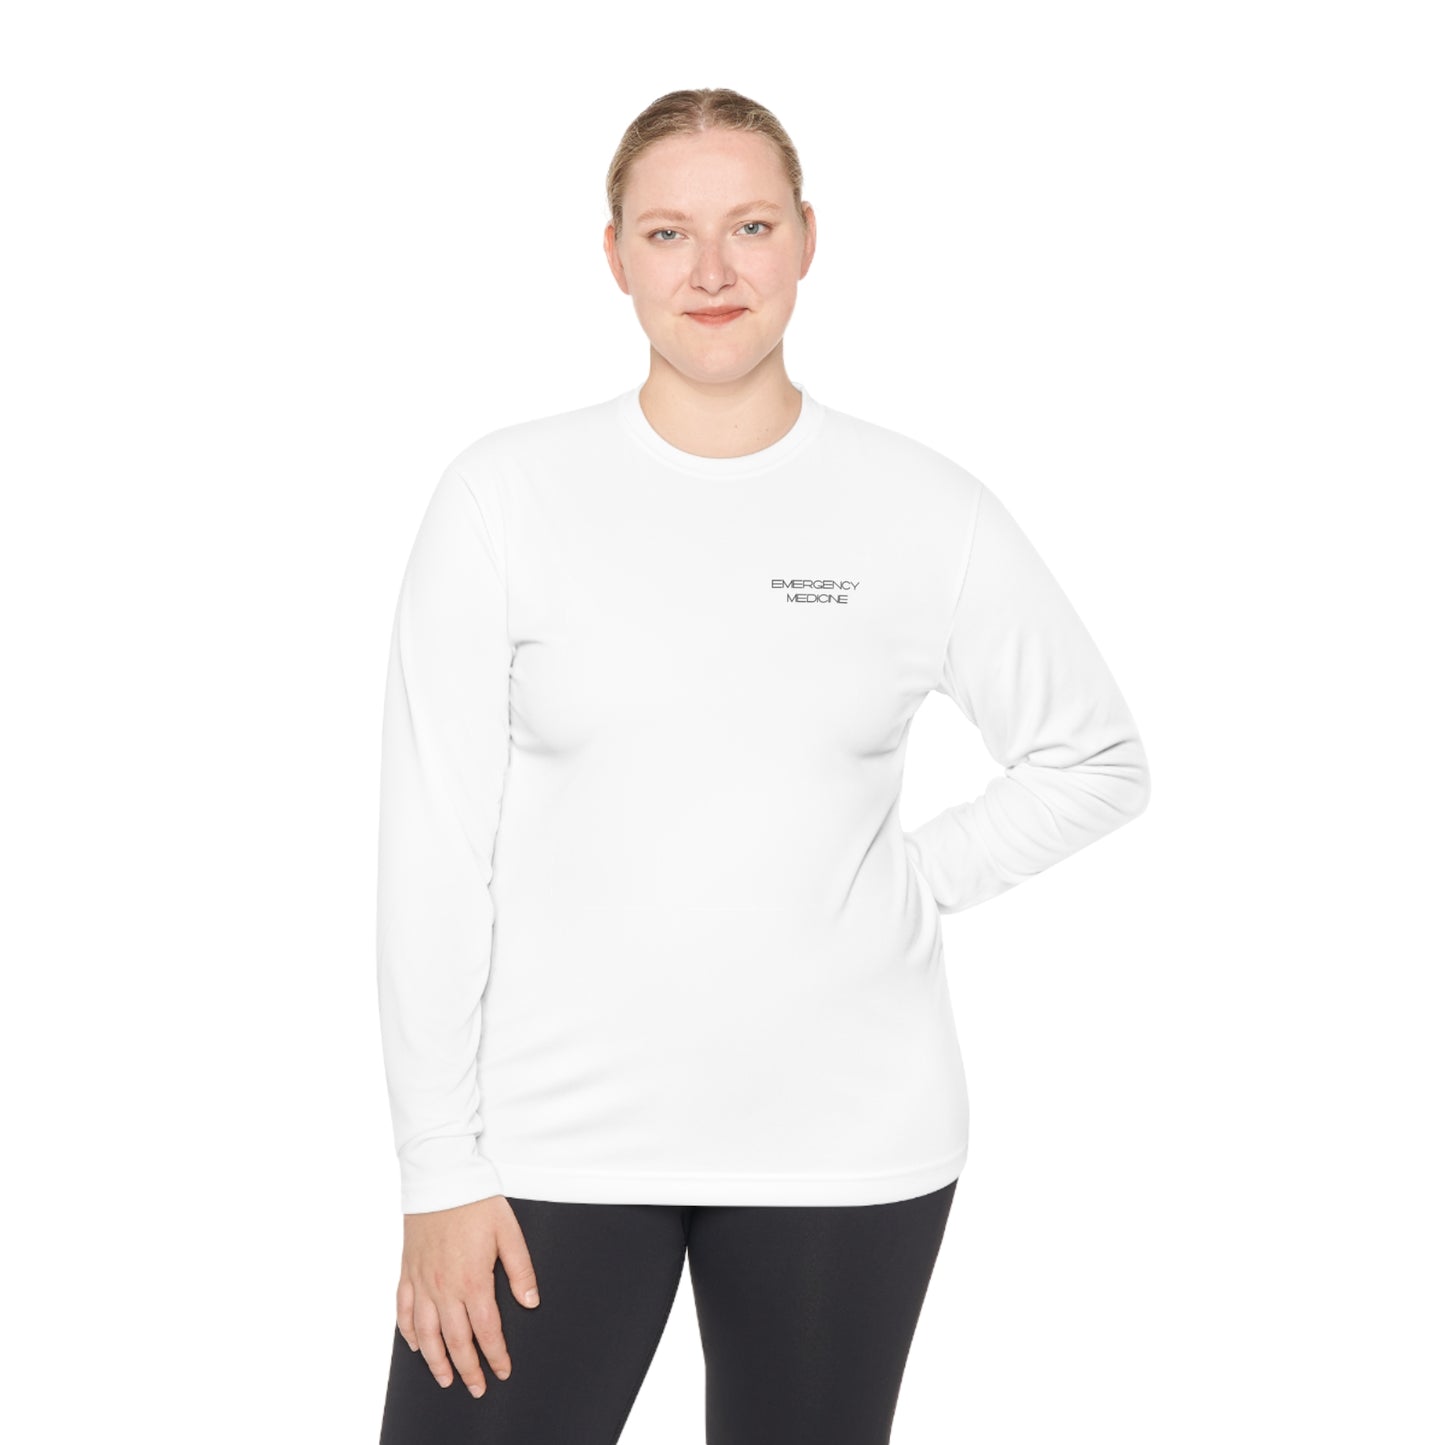 Pick Up the Pace! Funny Athletic Nurse, Doctor, NP, PA, Cardiology Unisex Lightweight Long Sleeve Tee!